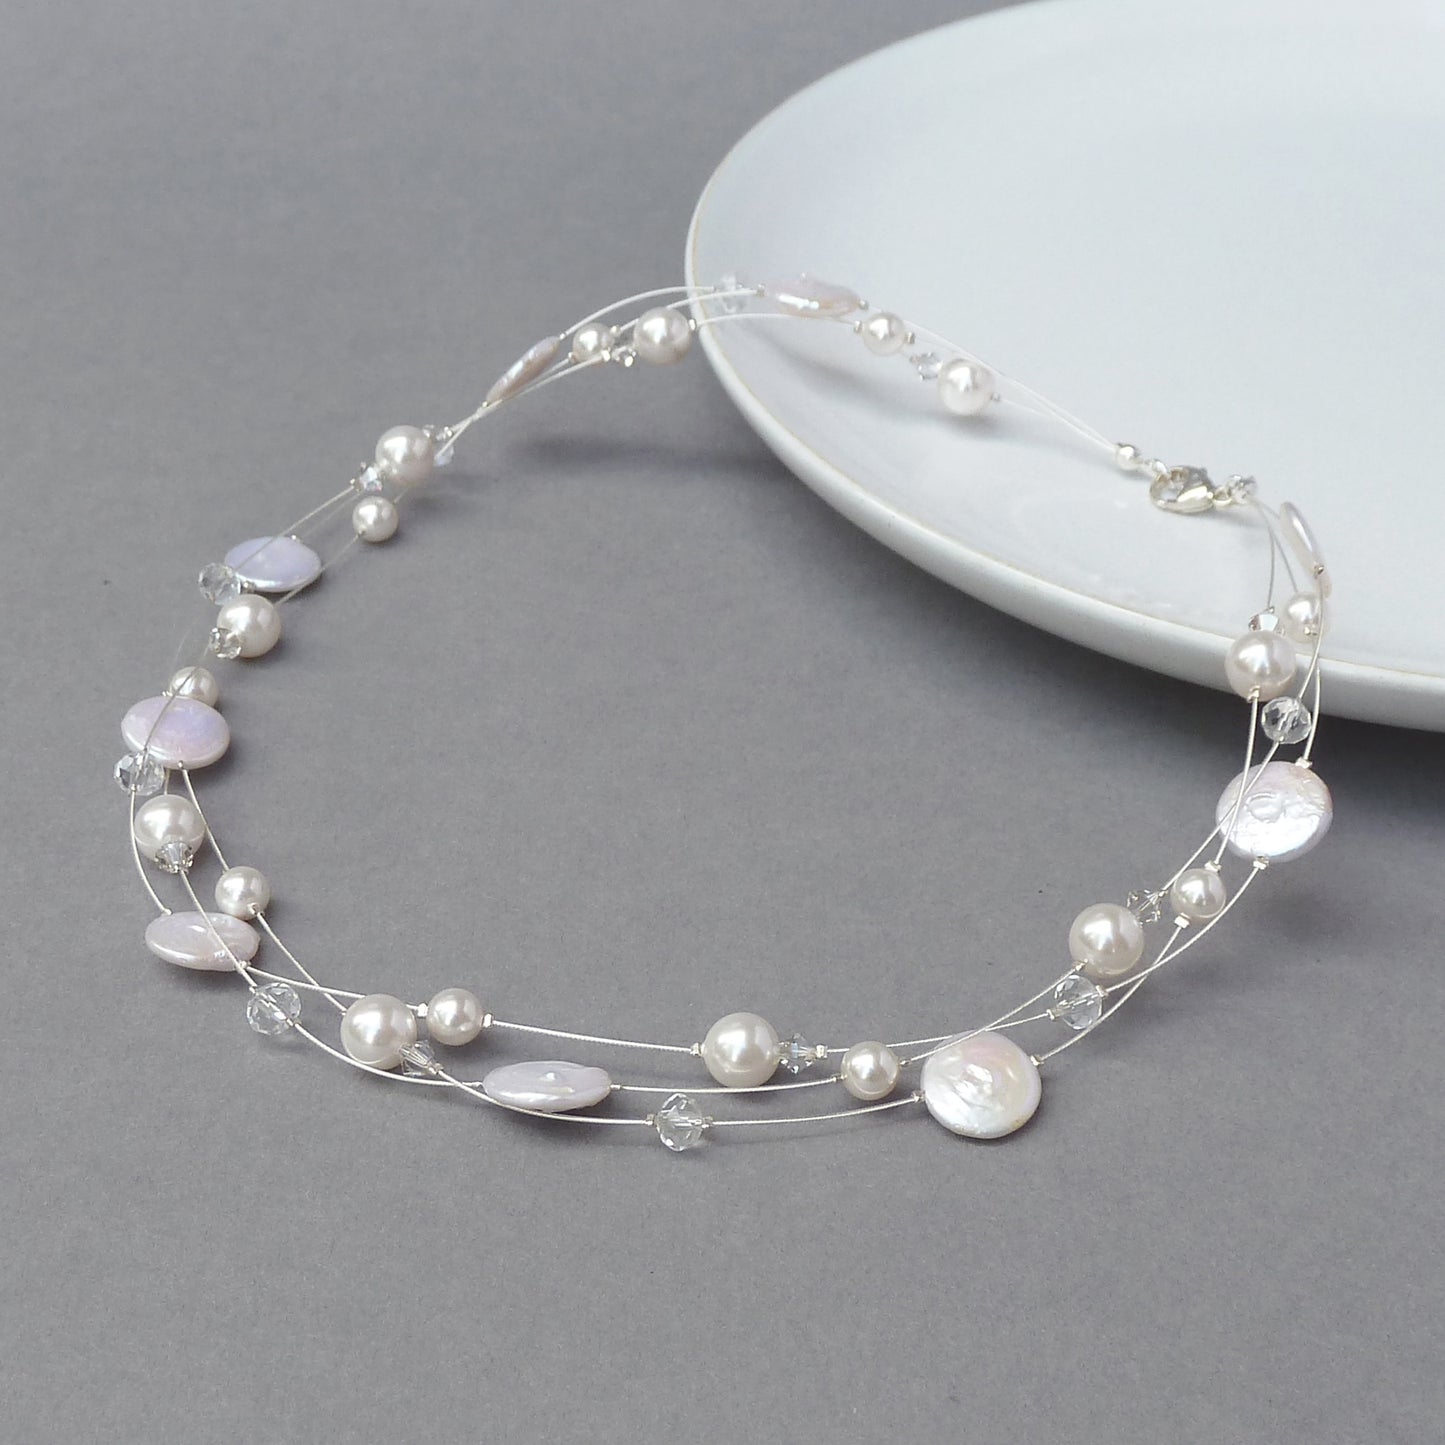 Dainty white floating pearl necklace